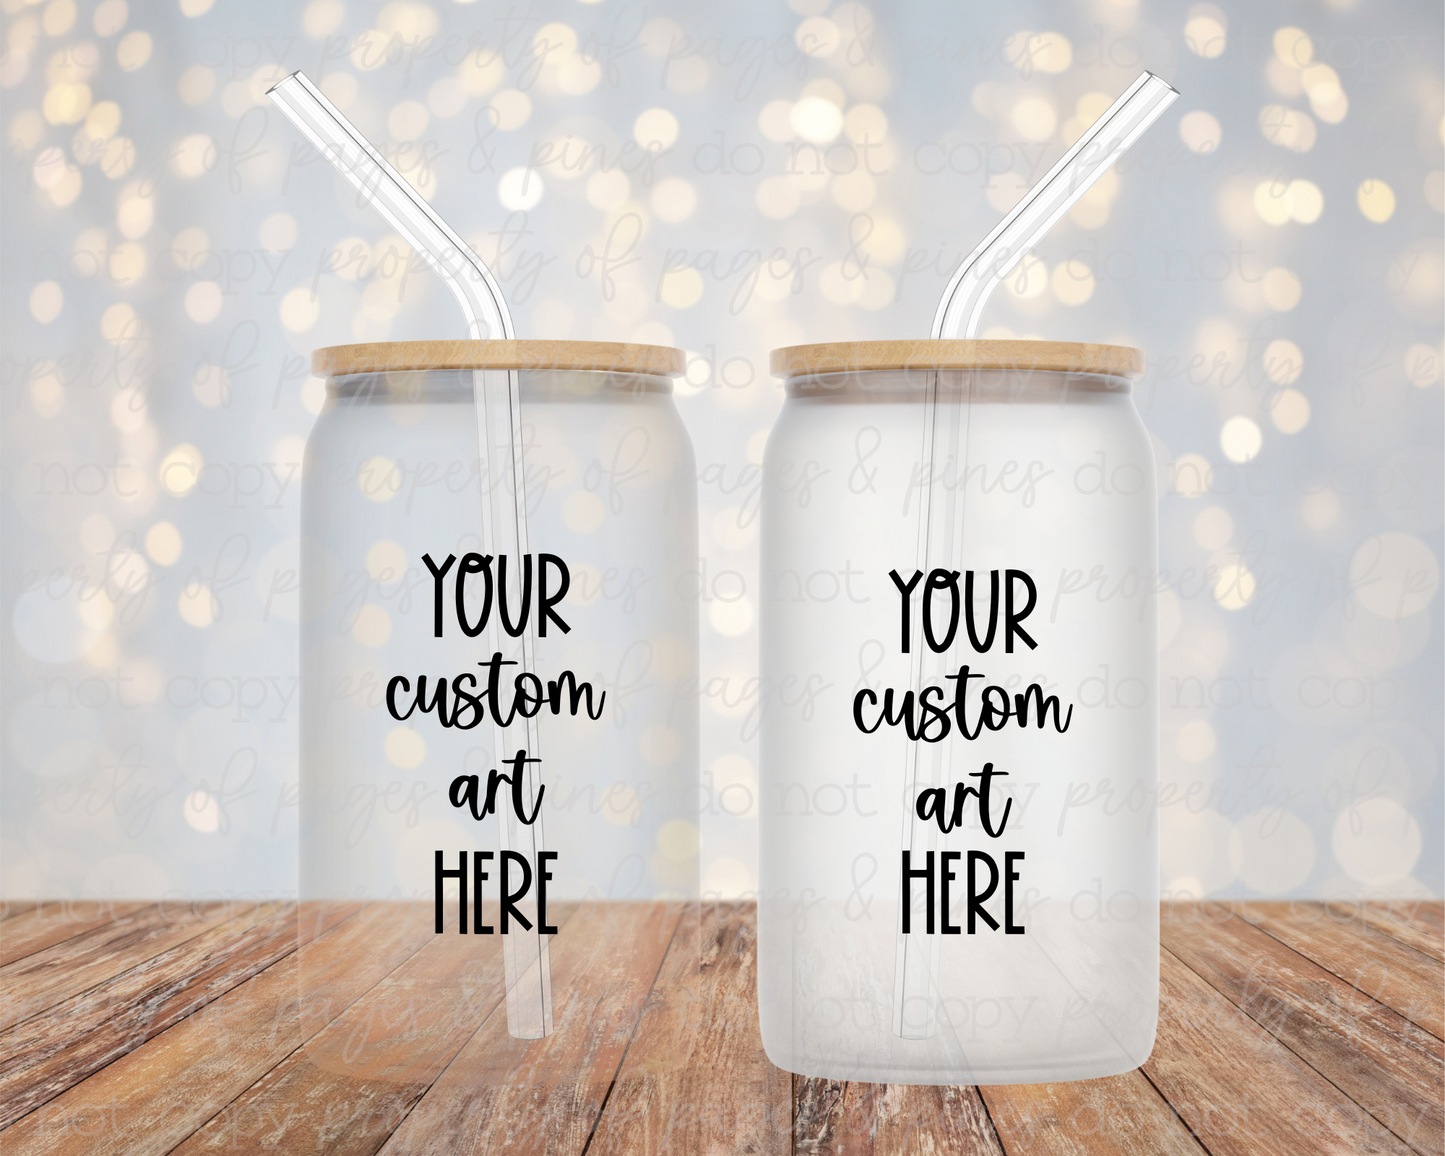 CUSTOM BOOKISH QUOTE ON ICED COFFEE CUP